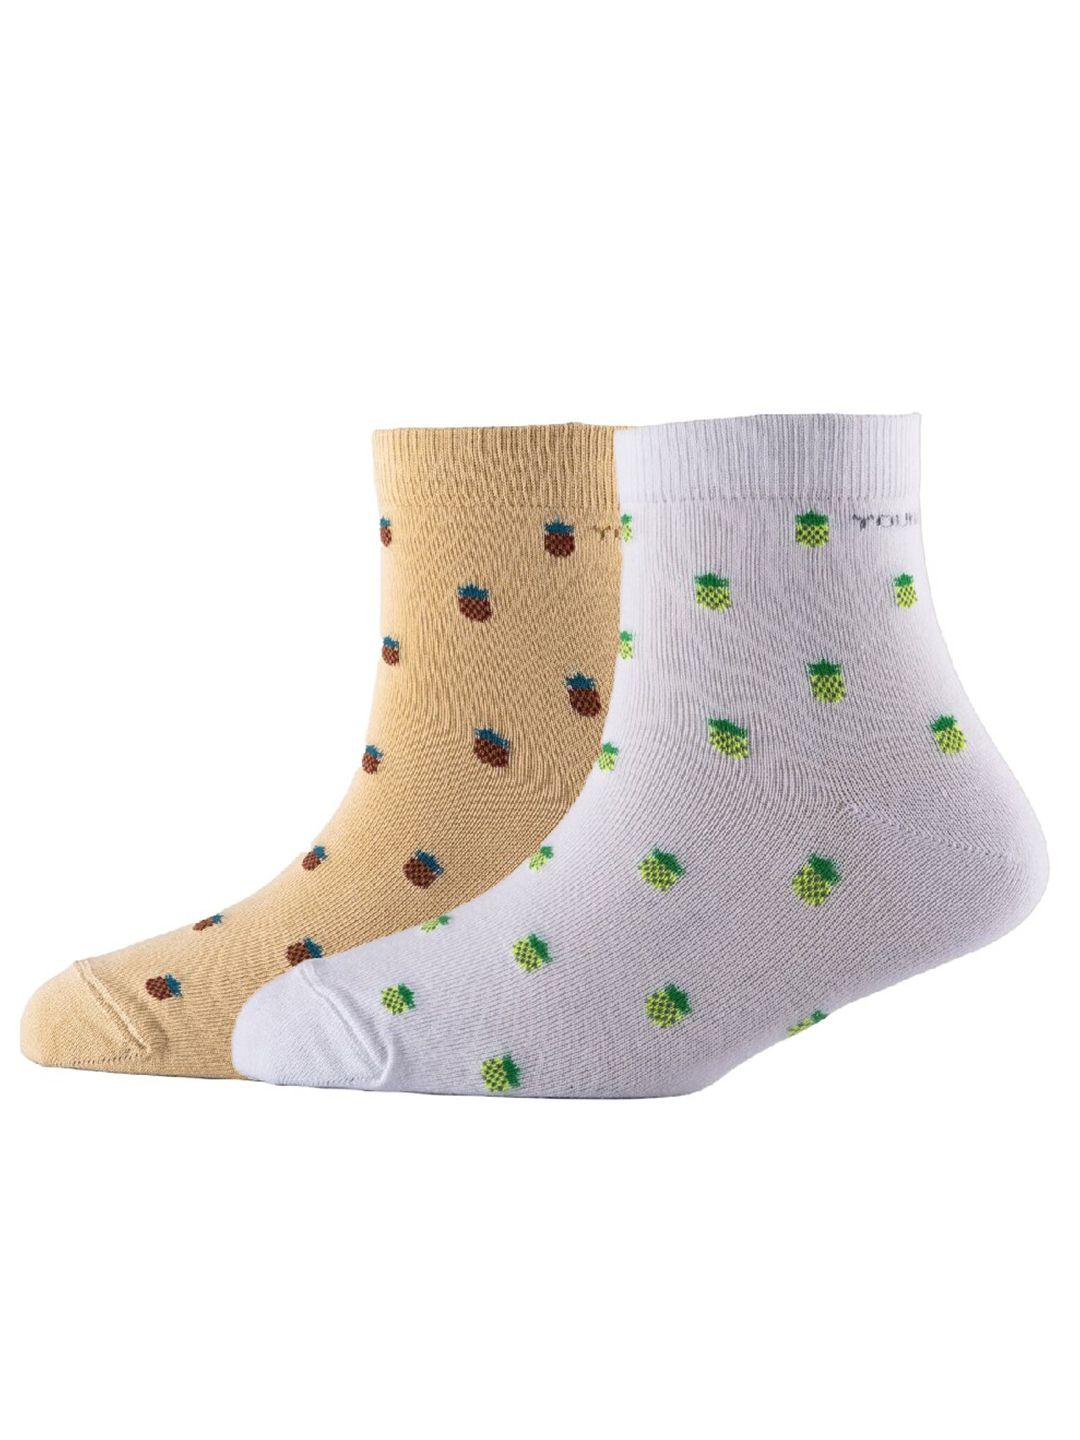 cotstyle men pack of 2 patterned cotton above ankle length socks